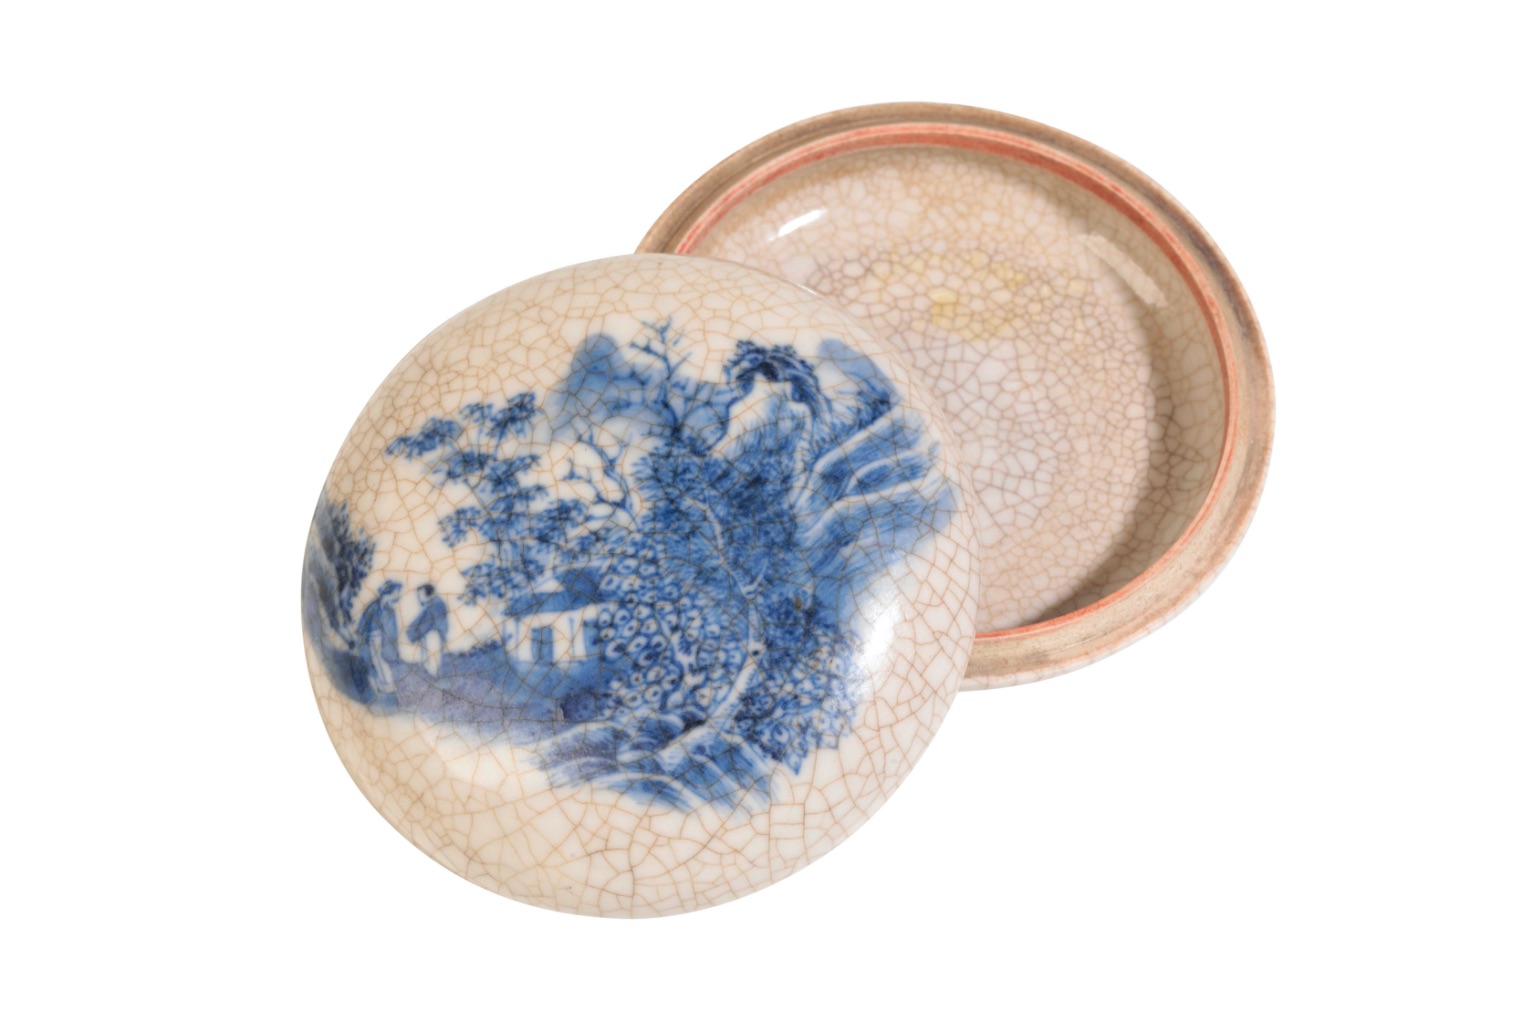 SOFT-PASTE BLUE AND WHITE SEAL PASTE BOX, QING DYNASTY - Image 3 of 3